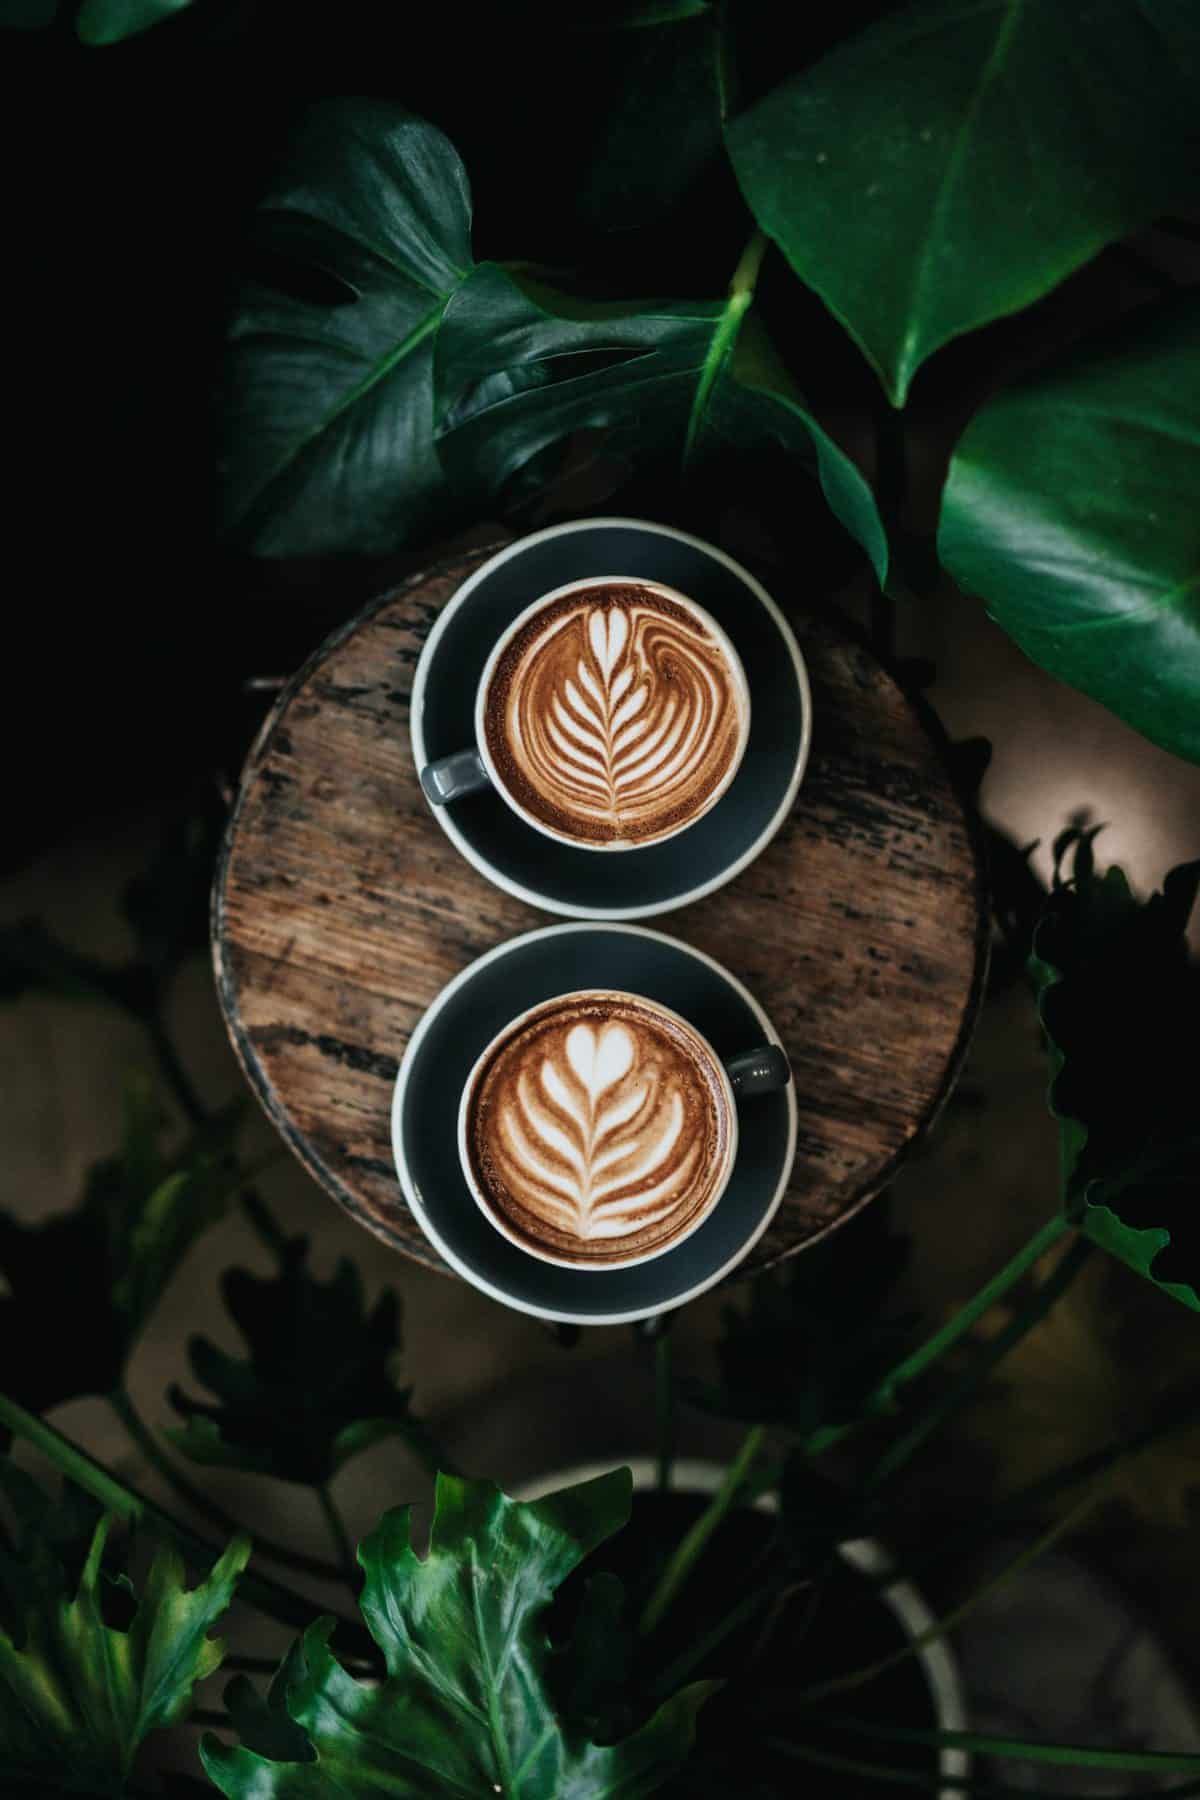 Birds eye view of two lattes on a table.